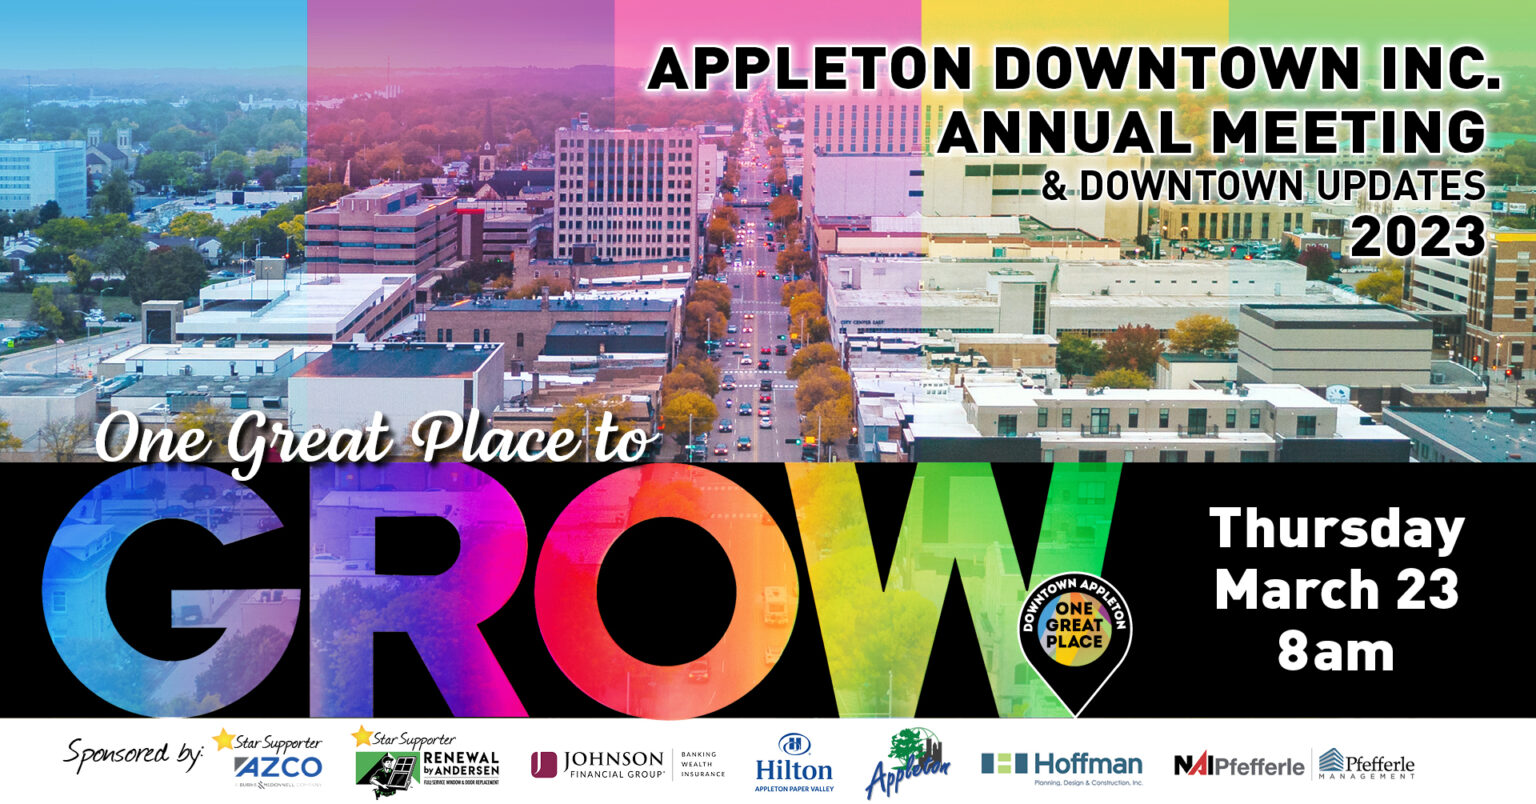 Appleton Downtown Inc. 2022 Annual Meeting and Downtown Updates